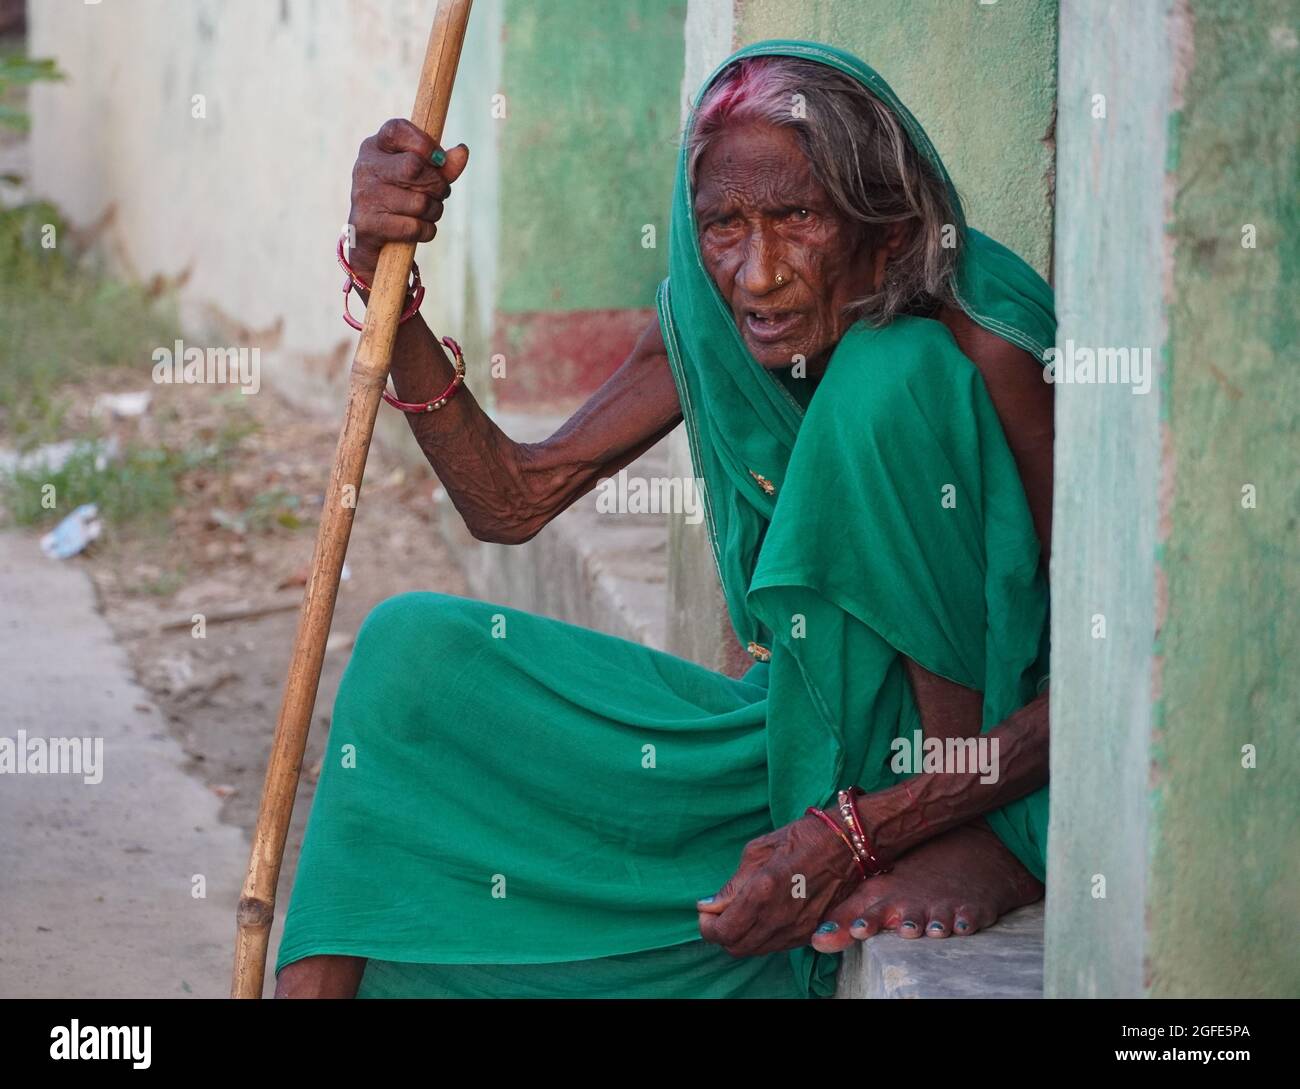 Old woman images Stock Photo